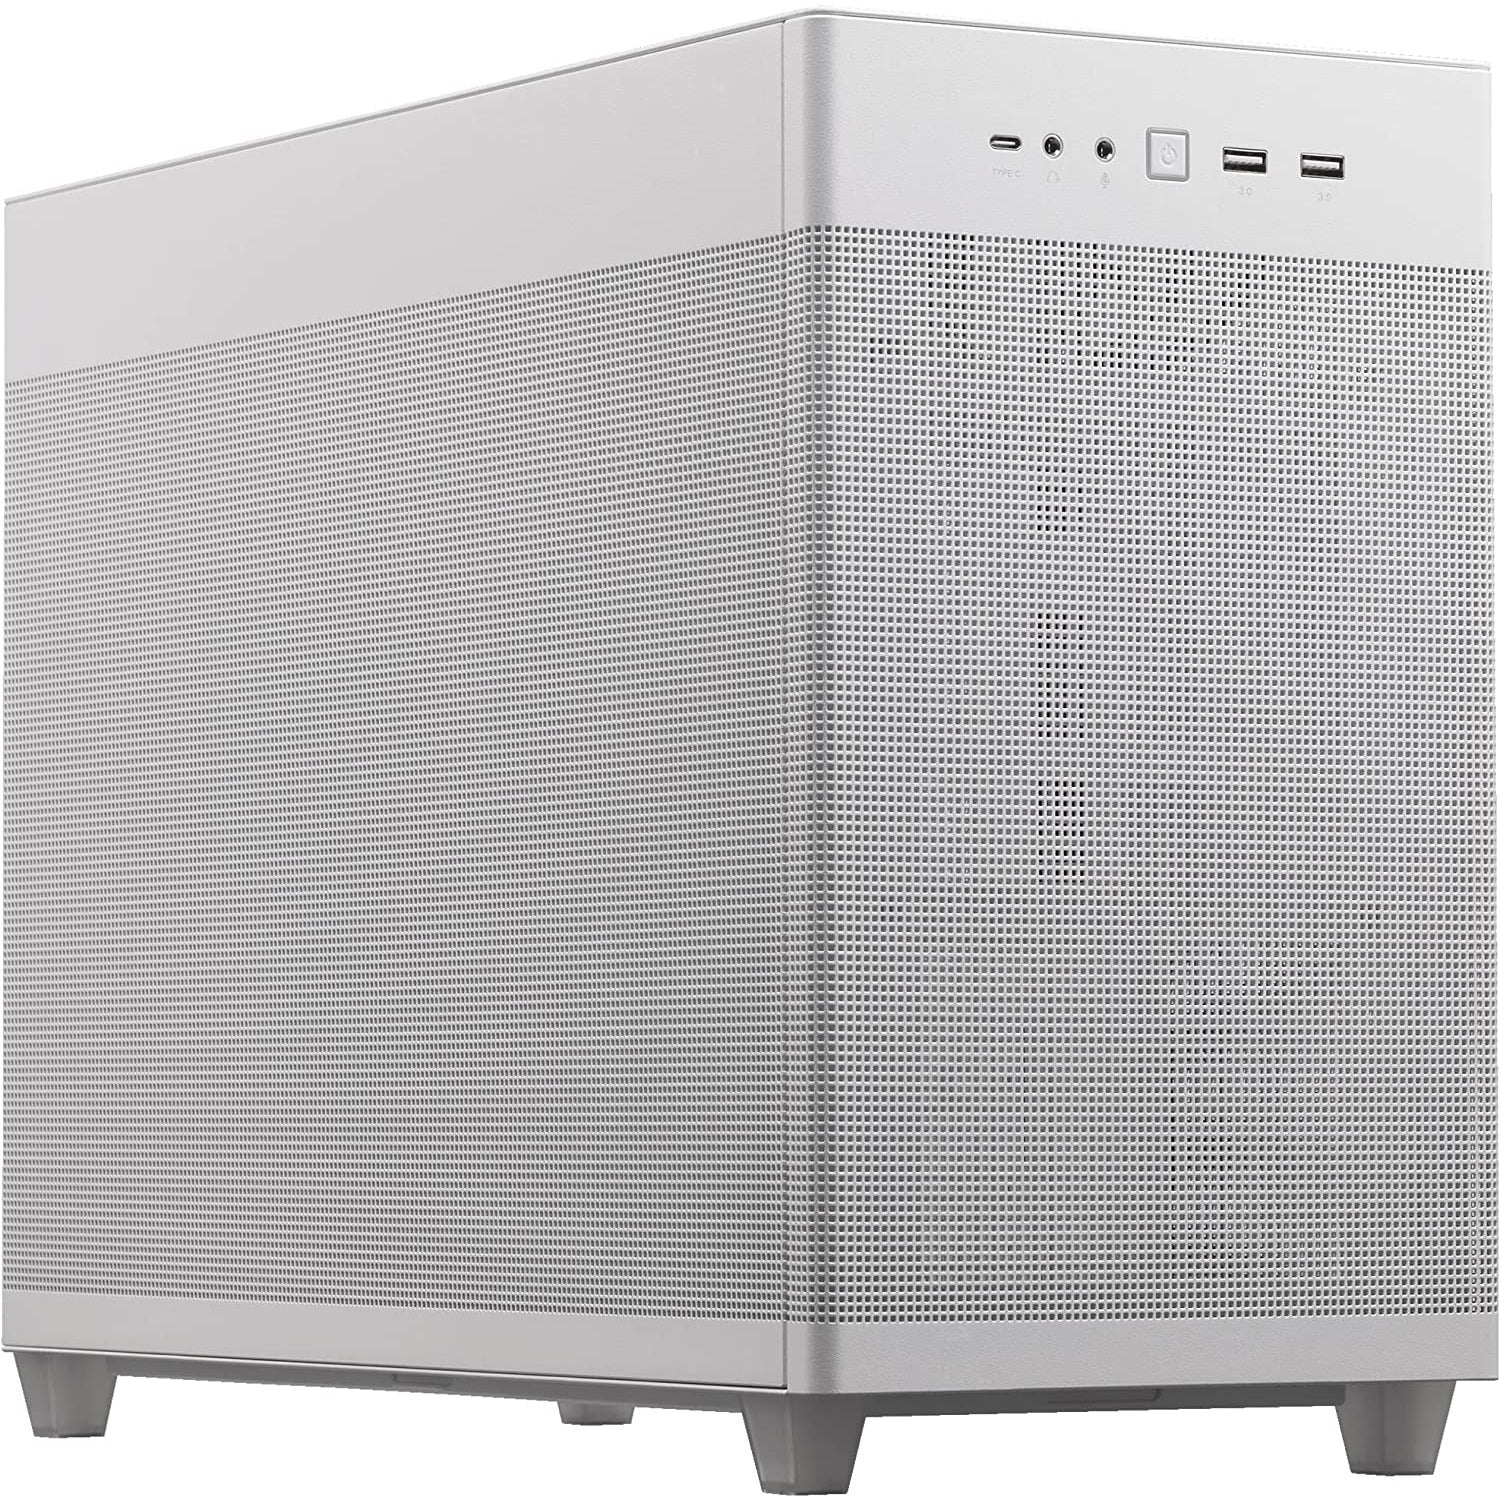  ASUS Prime AP201 33-Liter MicroATX Black case with Tool-Free  Side Panels and a Quasi-Filter mesh, with Support for 360 mm Coolers,  Graphics Cards up to 338 mm Long, and Standard ATX